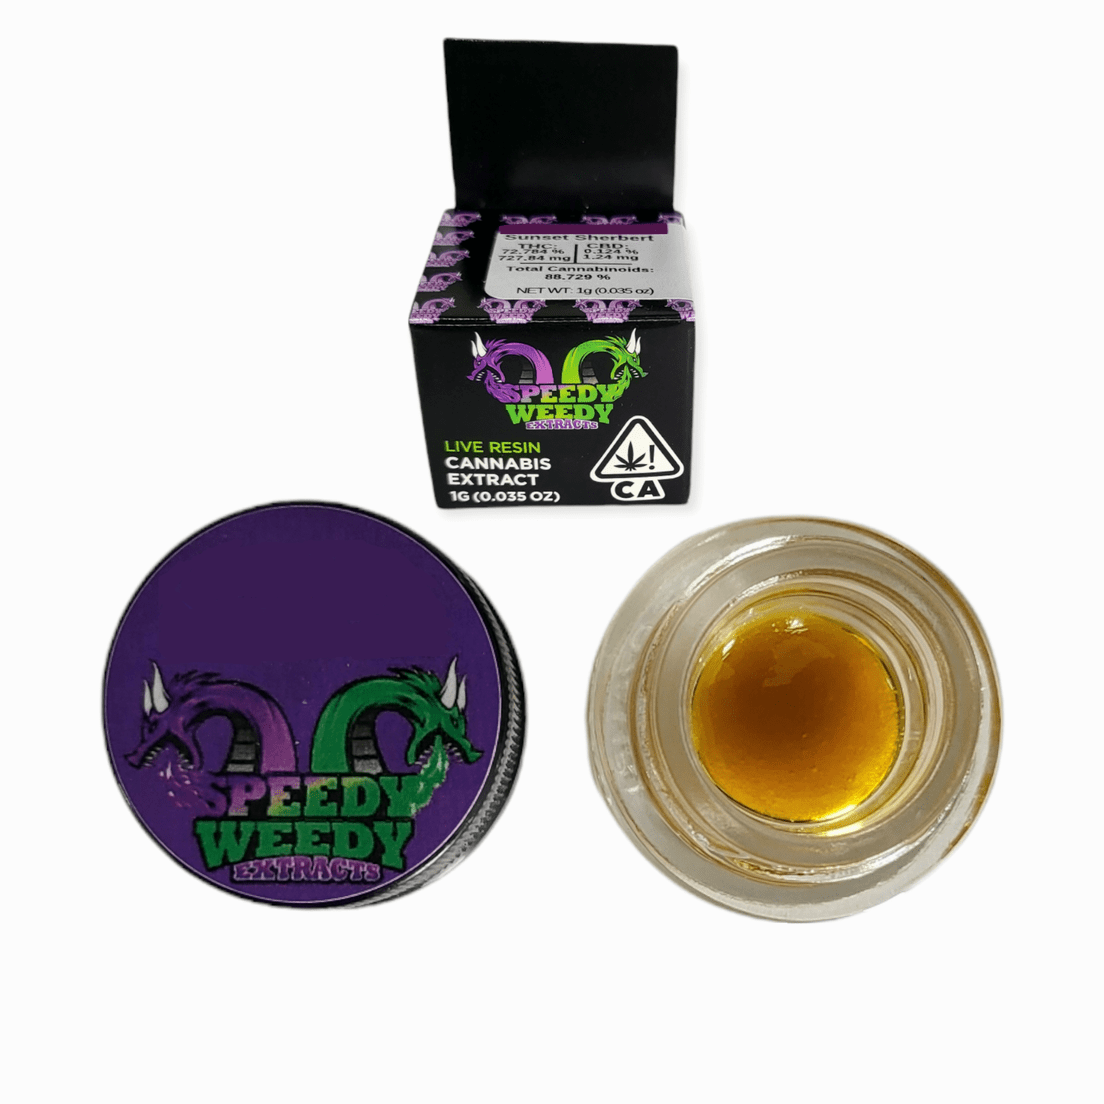 1. Speedy Weedy 1g Cured Resin Sauce - Sour Strawberry (S) 3/$60 Mix/Match